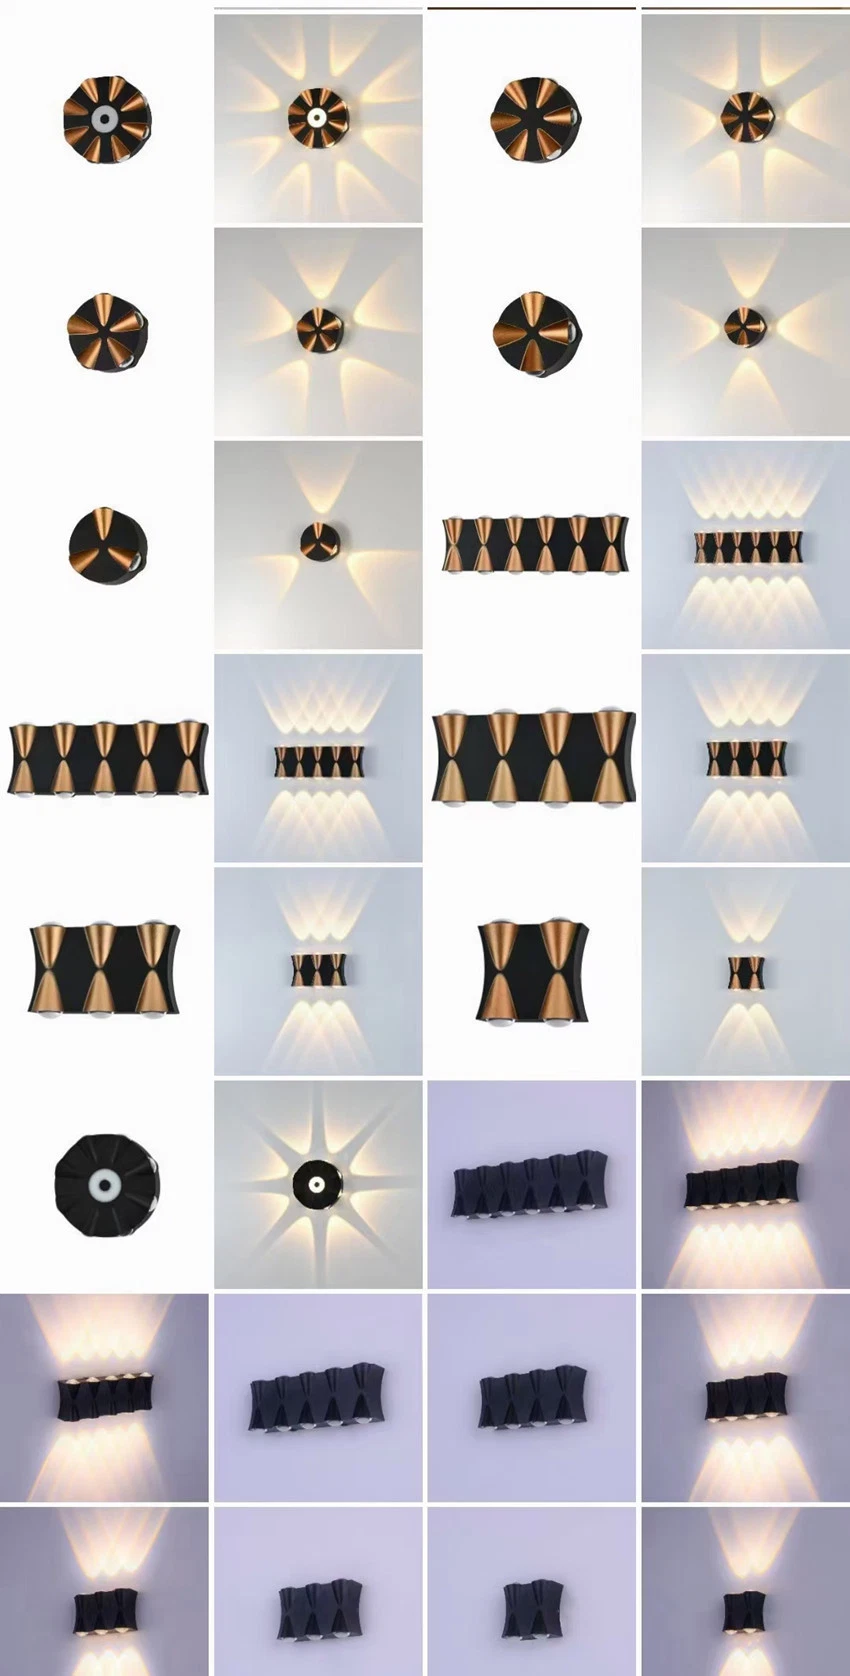 Modern LED Wall Light up Down Wall Bracket Light Fixture Indoor Outdoor Home Bedroom Hotel Lighting Decoration Wall Lamps 2W 4W 6W 8W